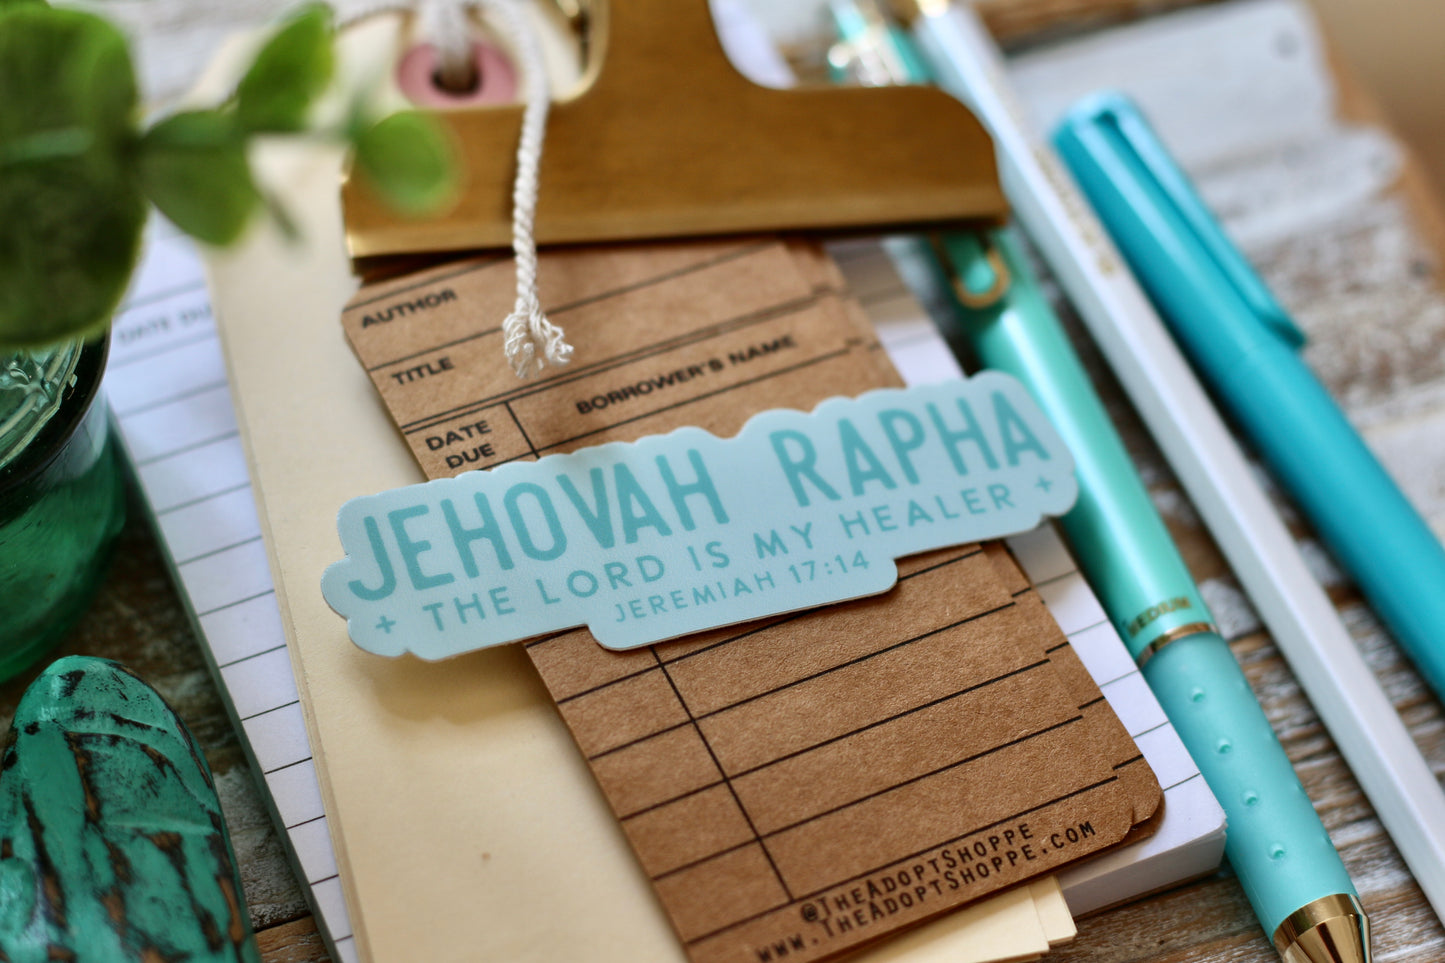 Jehovah Rapha - the Lord is my healer (Jeremiah 17:14) waterproof vinyl sticker decal